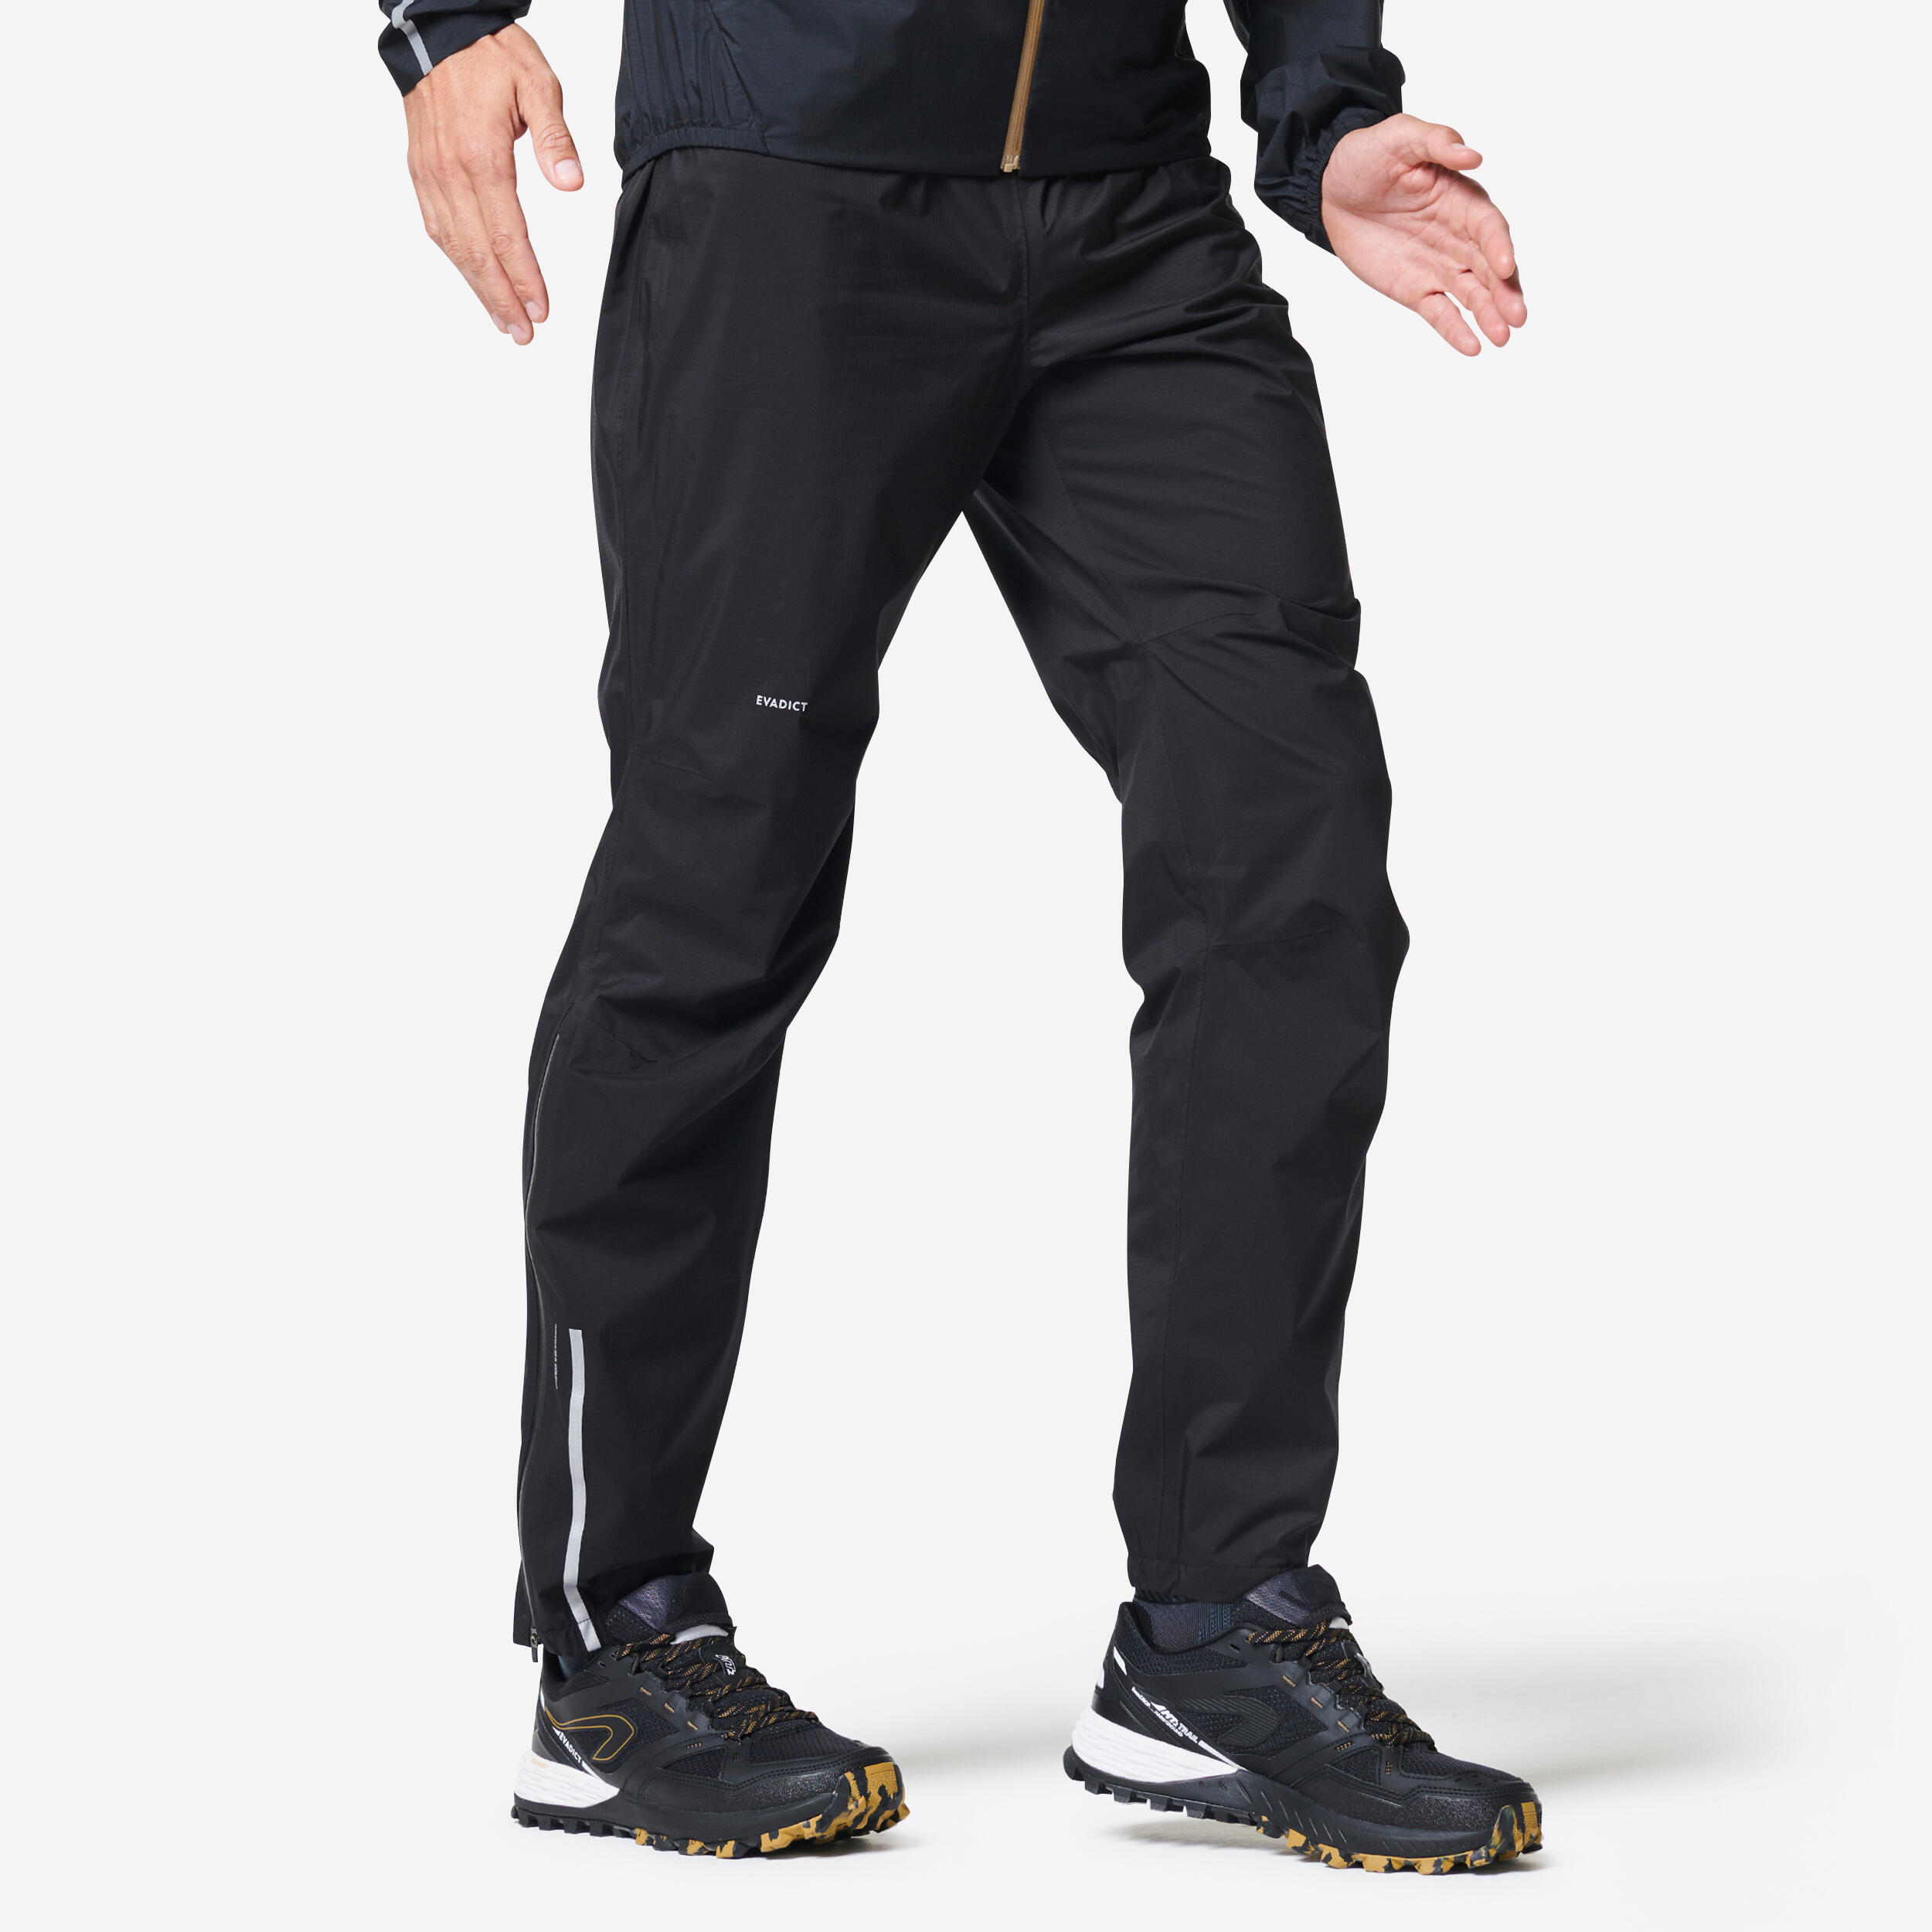 Waterproof built-in overshoes cycling rain overtrousers, black - Decathlon